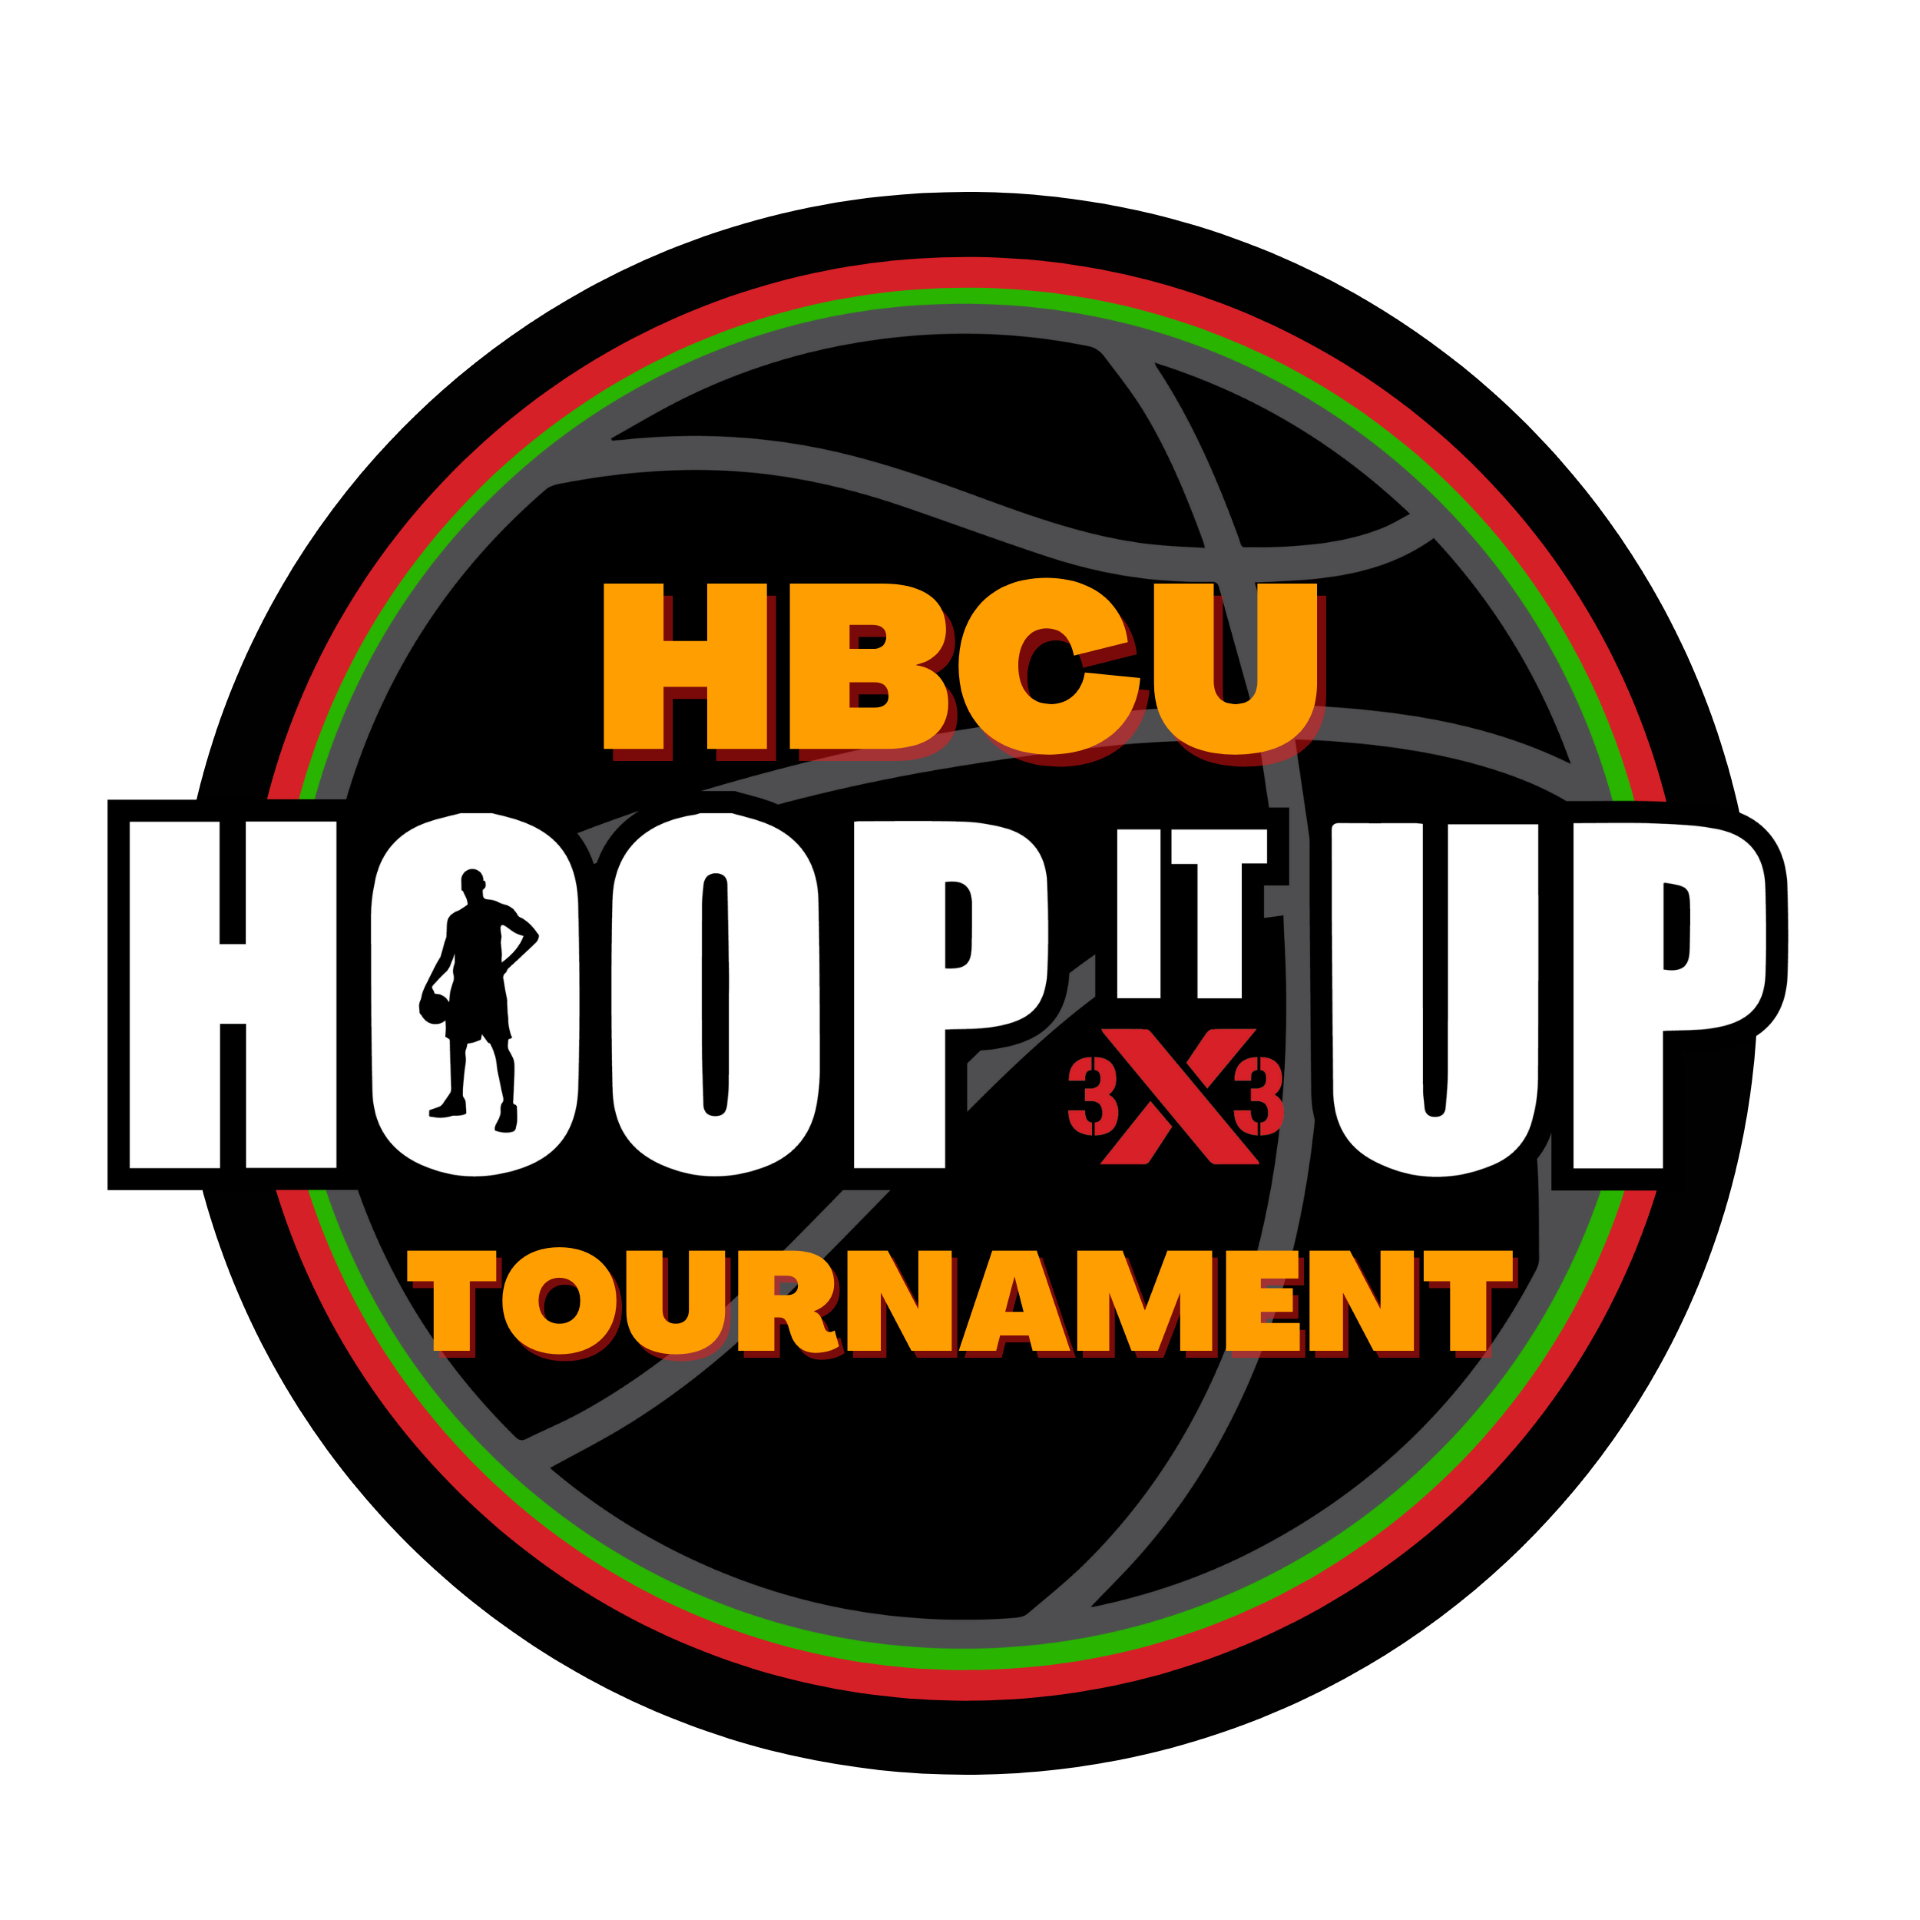 NBA legend Kevin Garnett’s Hoop It Up HBCU Tournament to be Broadcasted ...